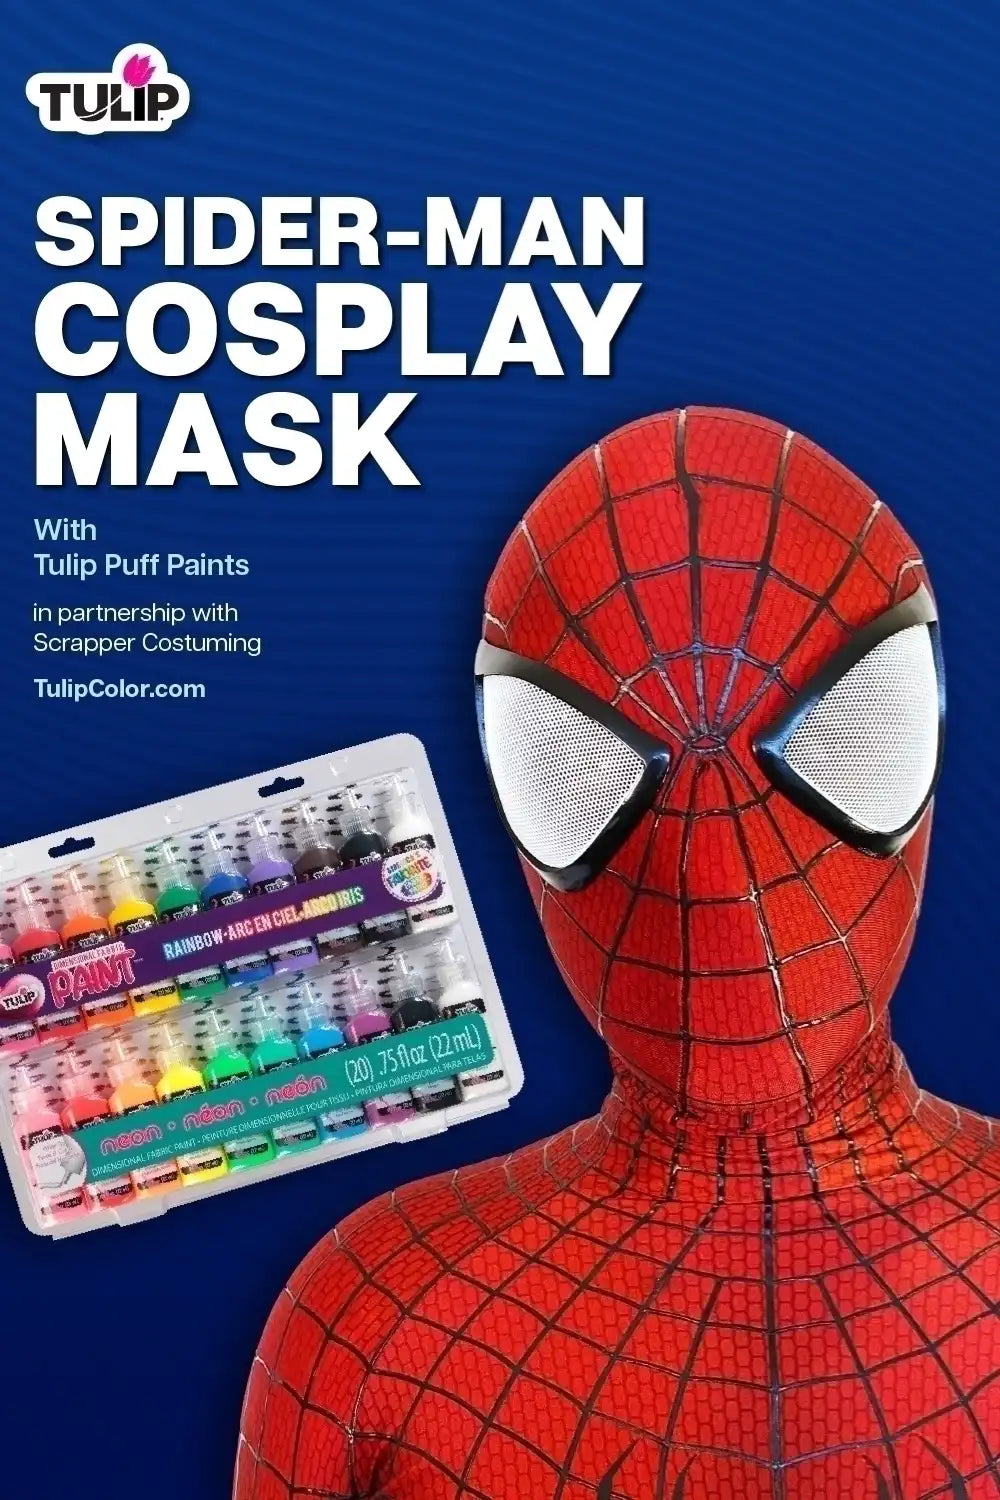 Spiderman Kids Arts and Crafts Coloring Paint Set with 6 Colors, Paint  Brush, and 2 Poster Sheets